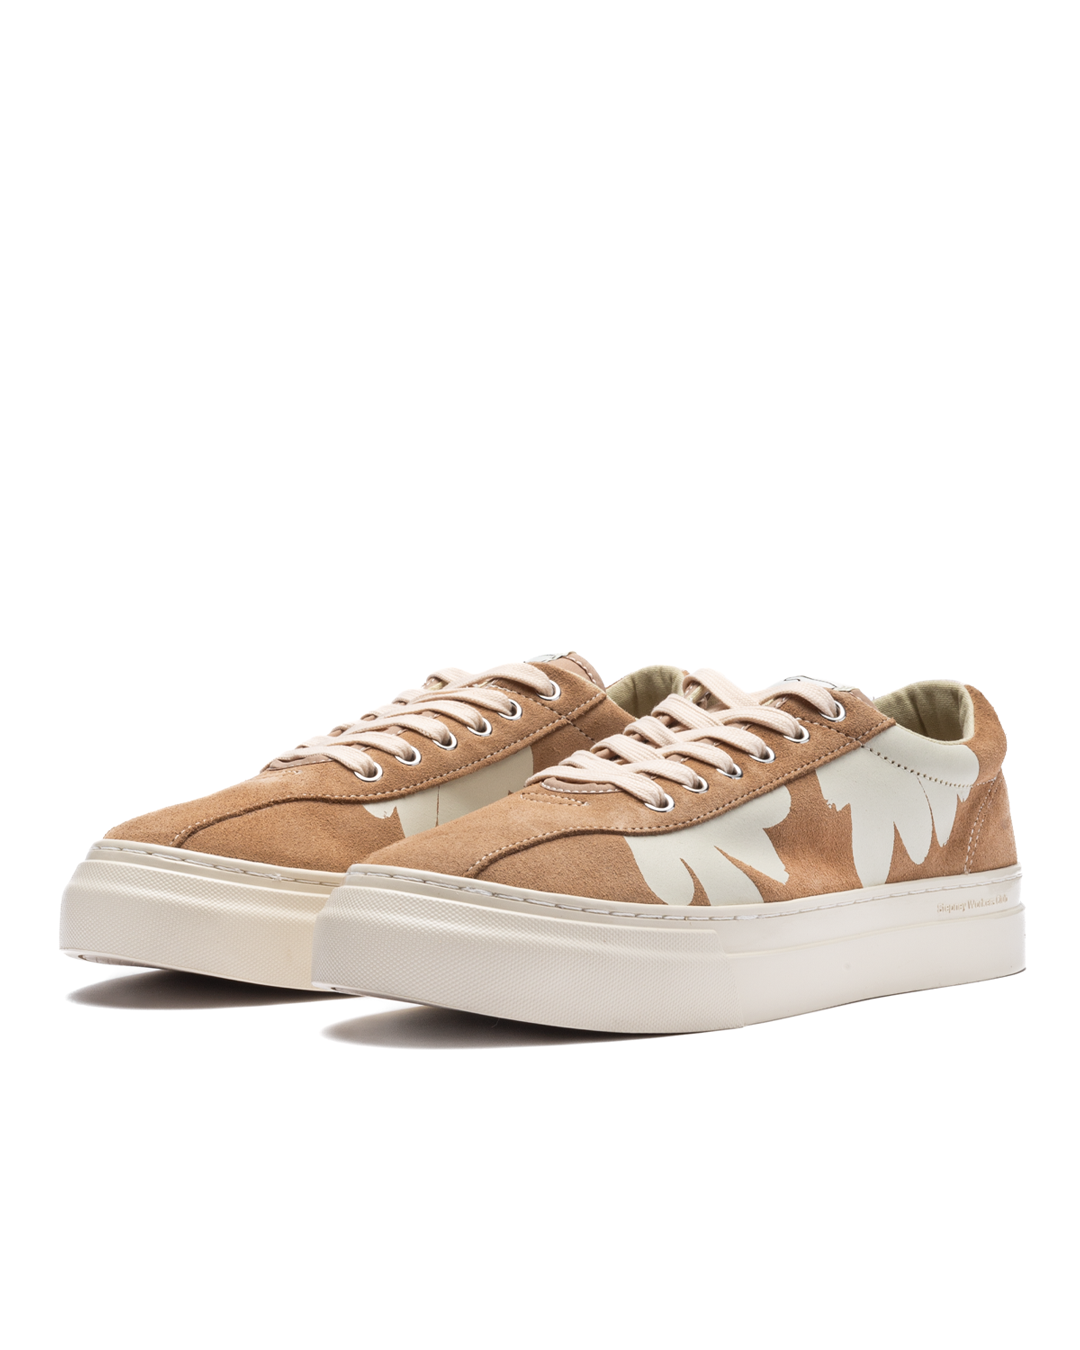 Dellow Shroom Hands Suede Earth/White